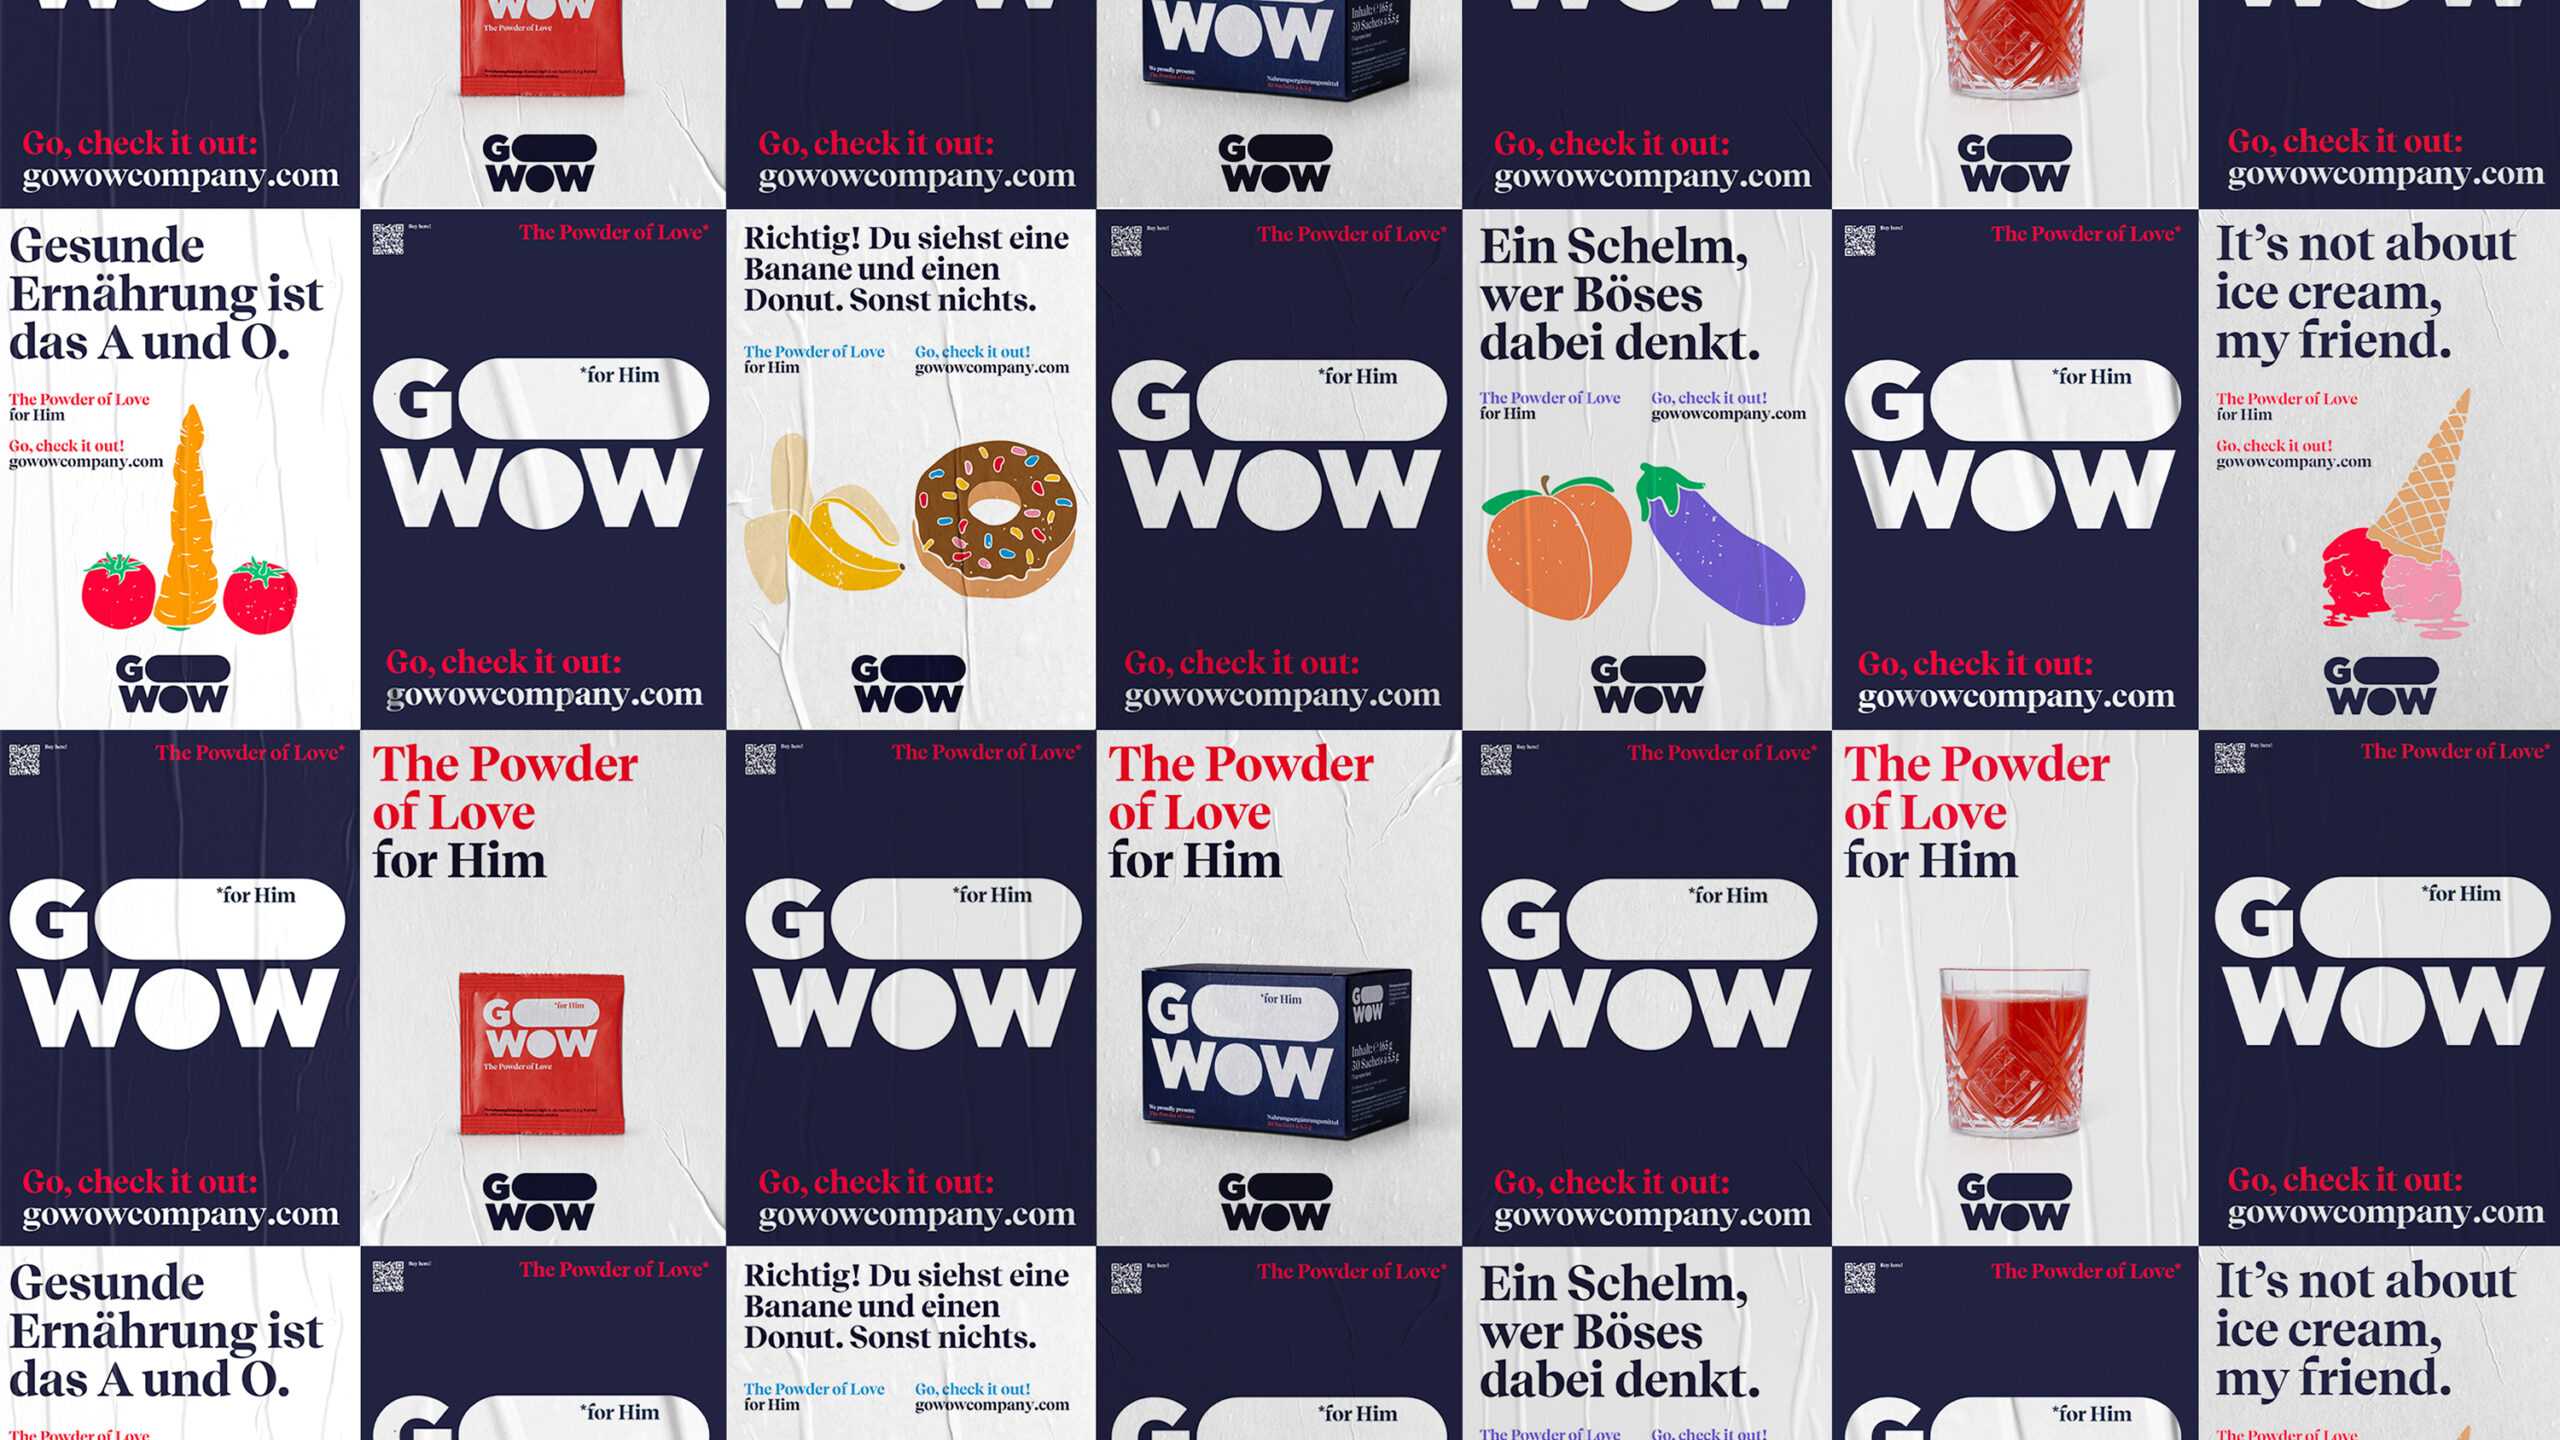 posterwall with different posters for Go Wow